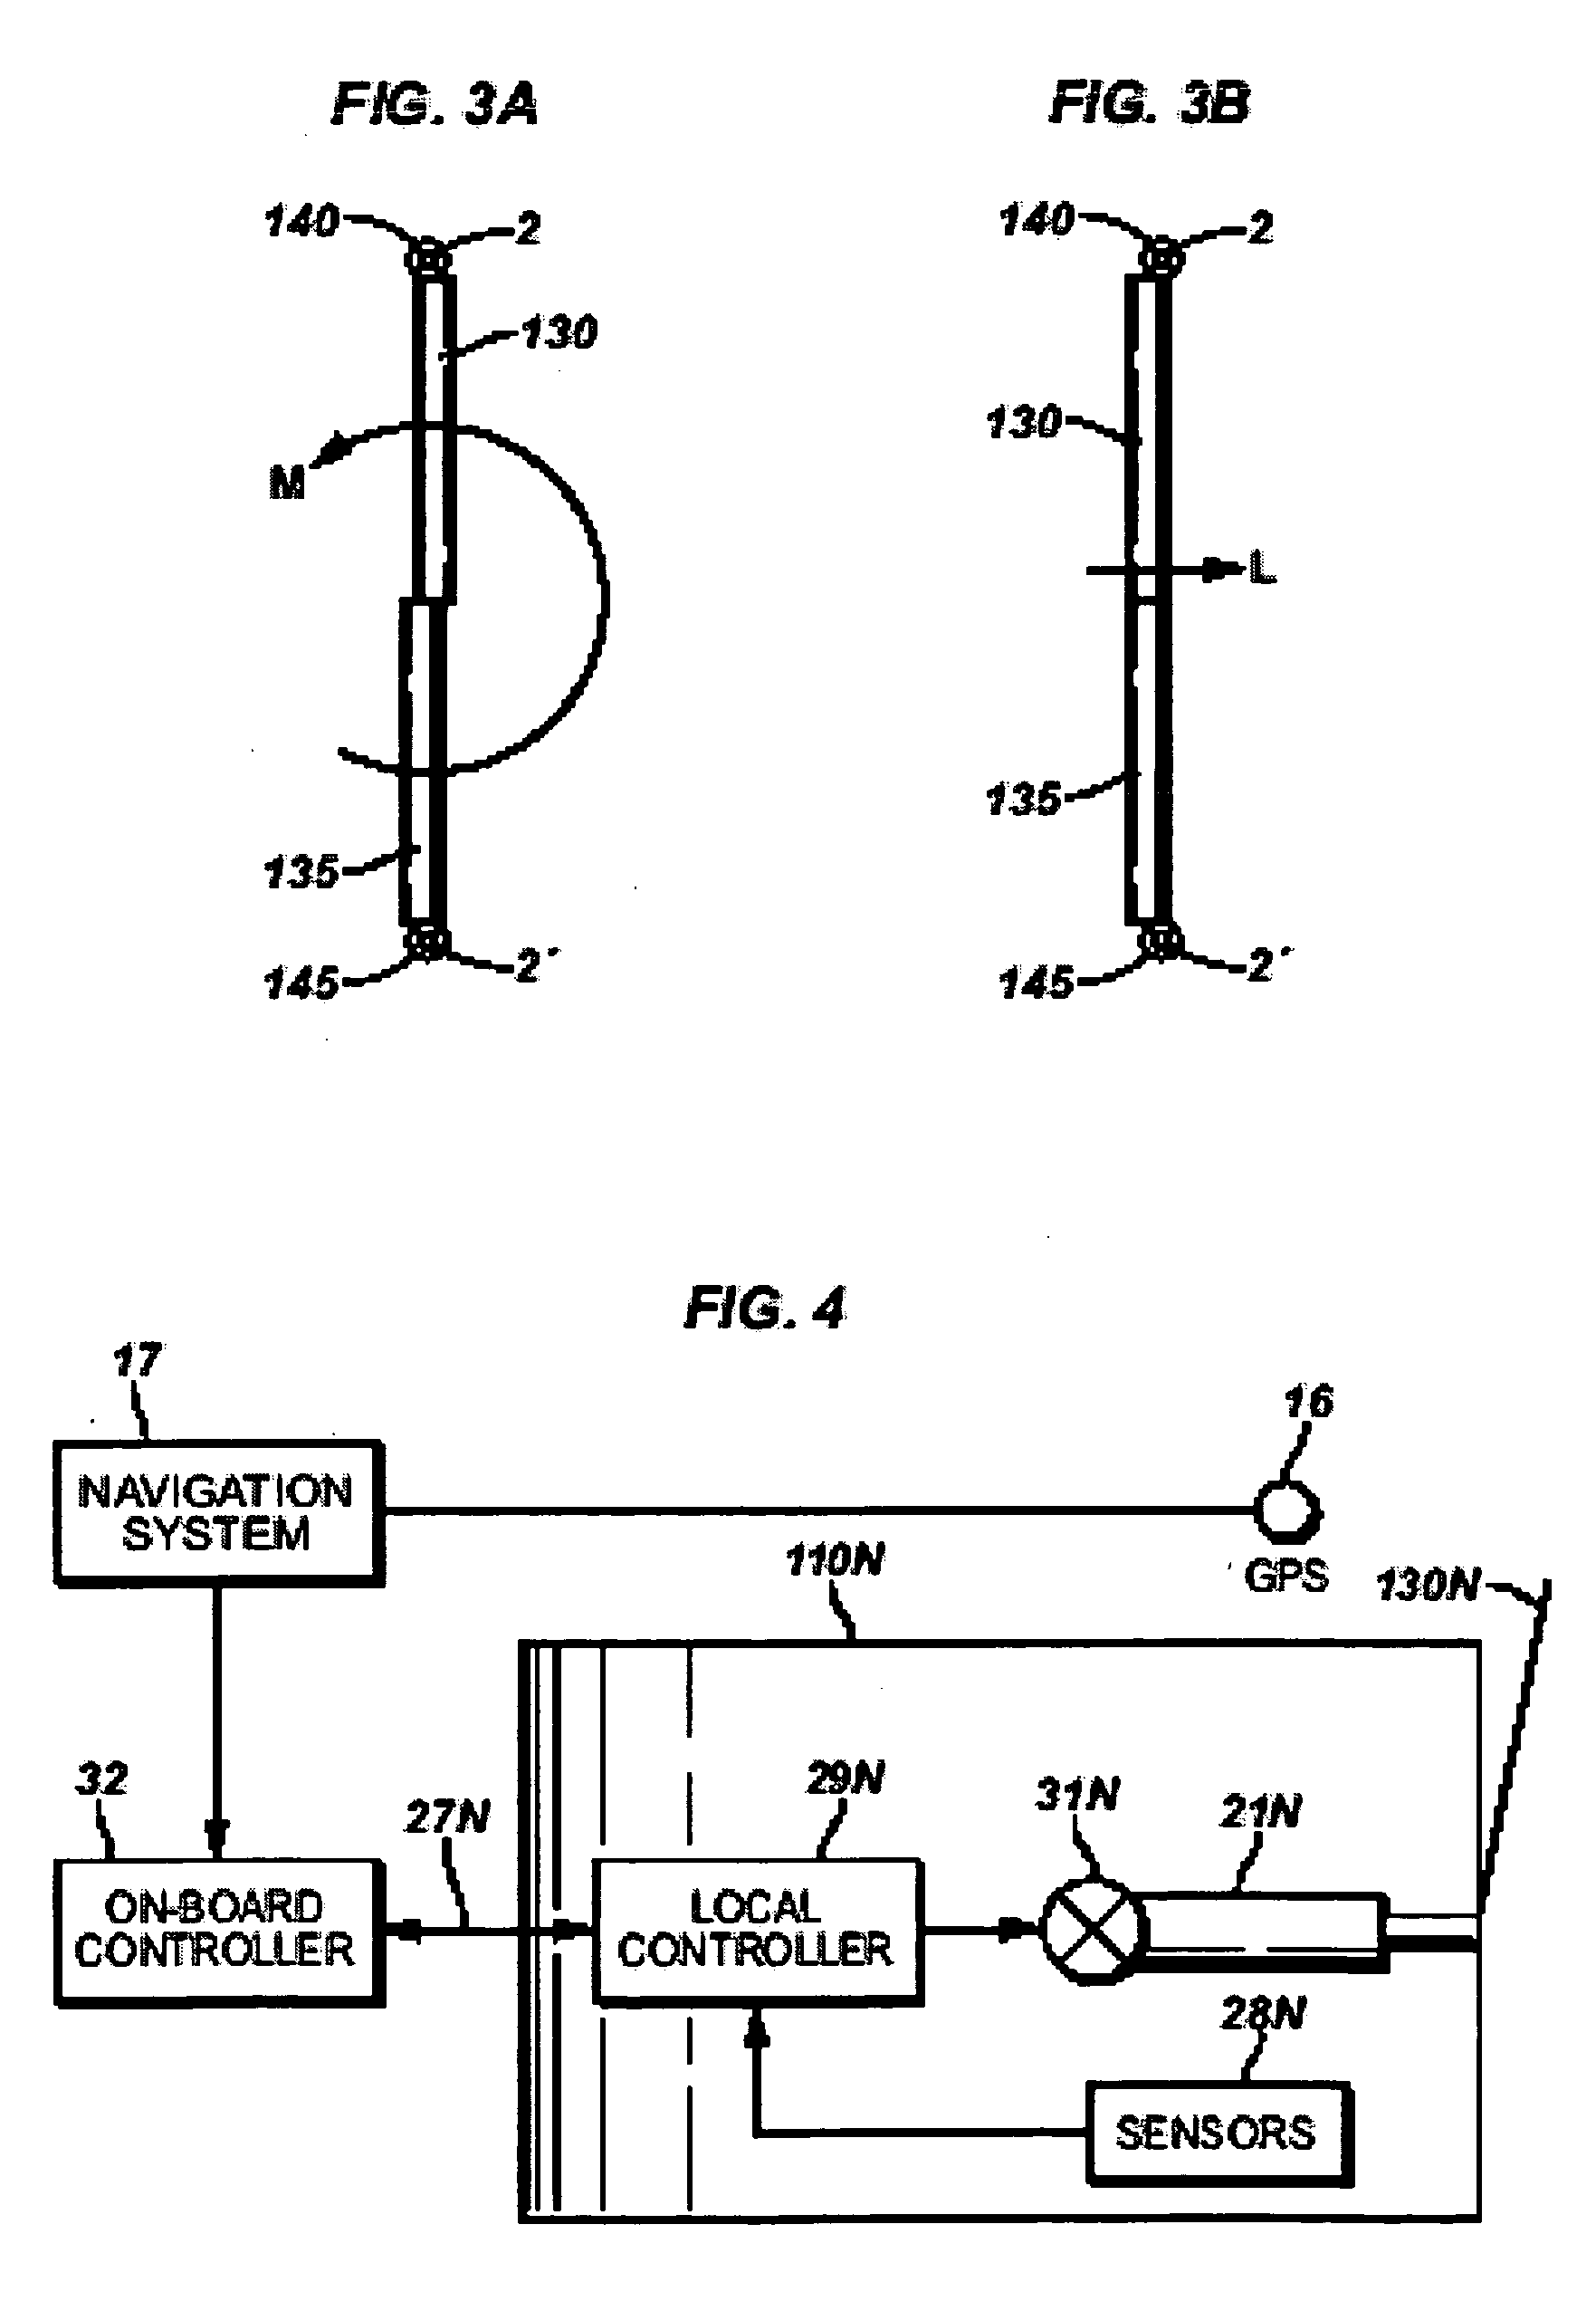 Apparatus and methods for seismic streamer positioning